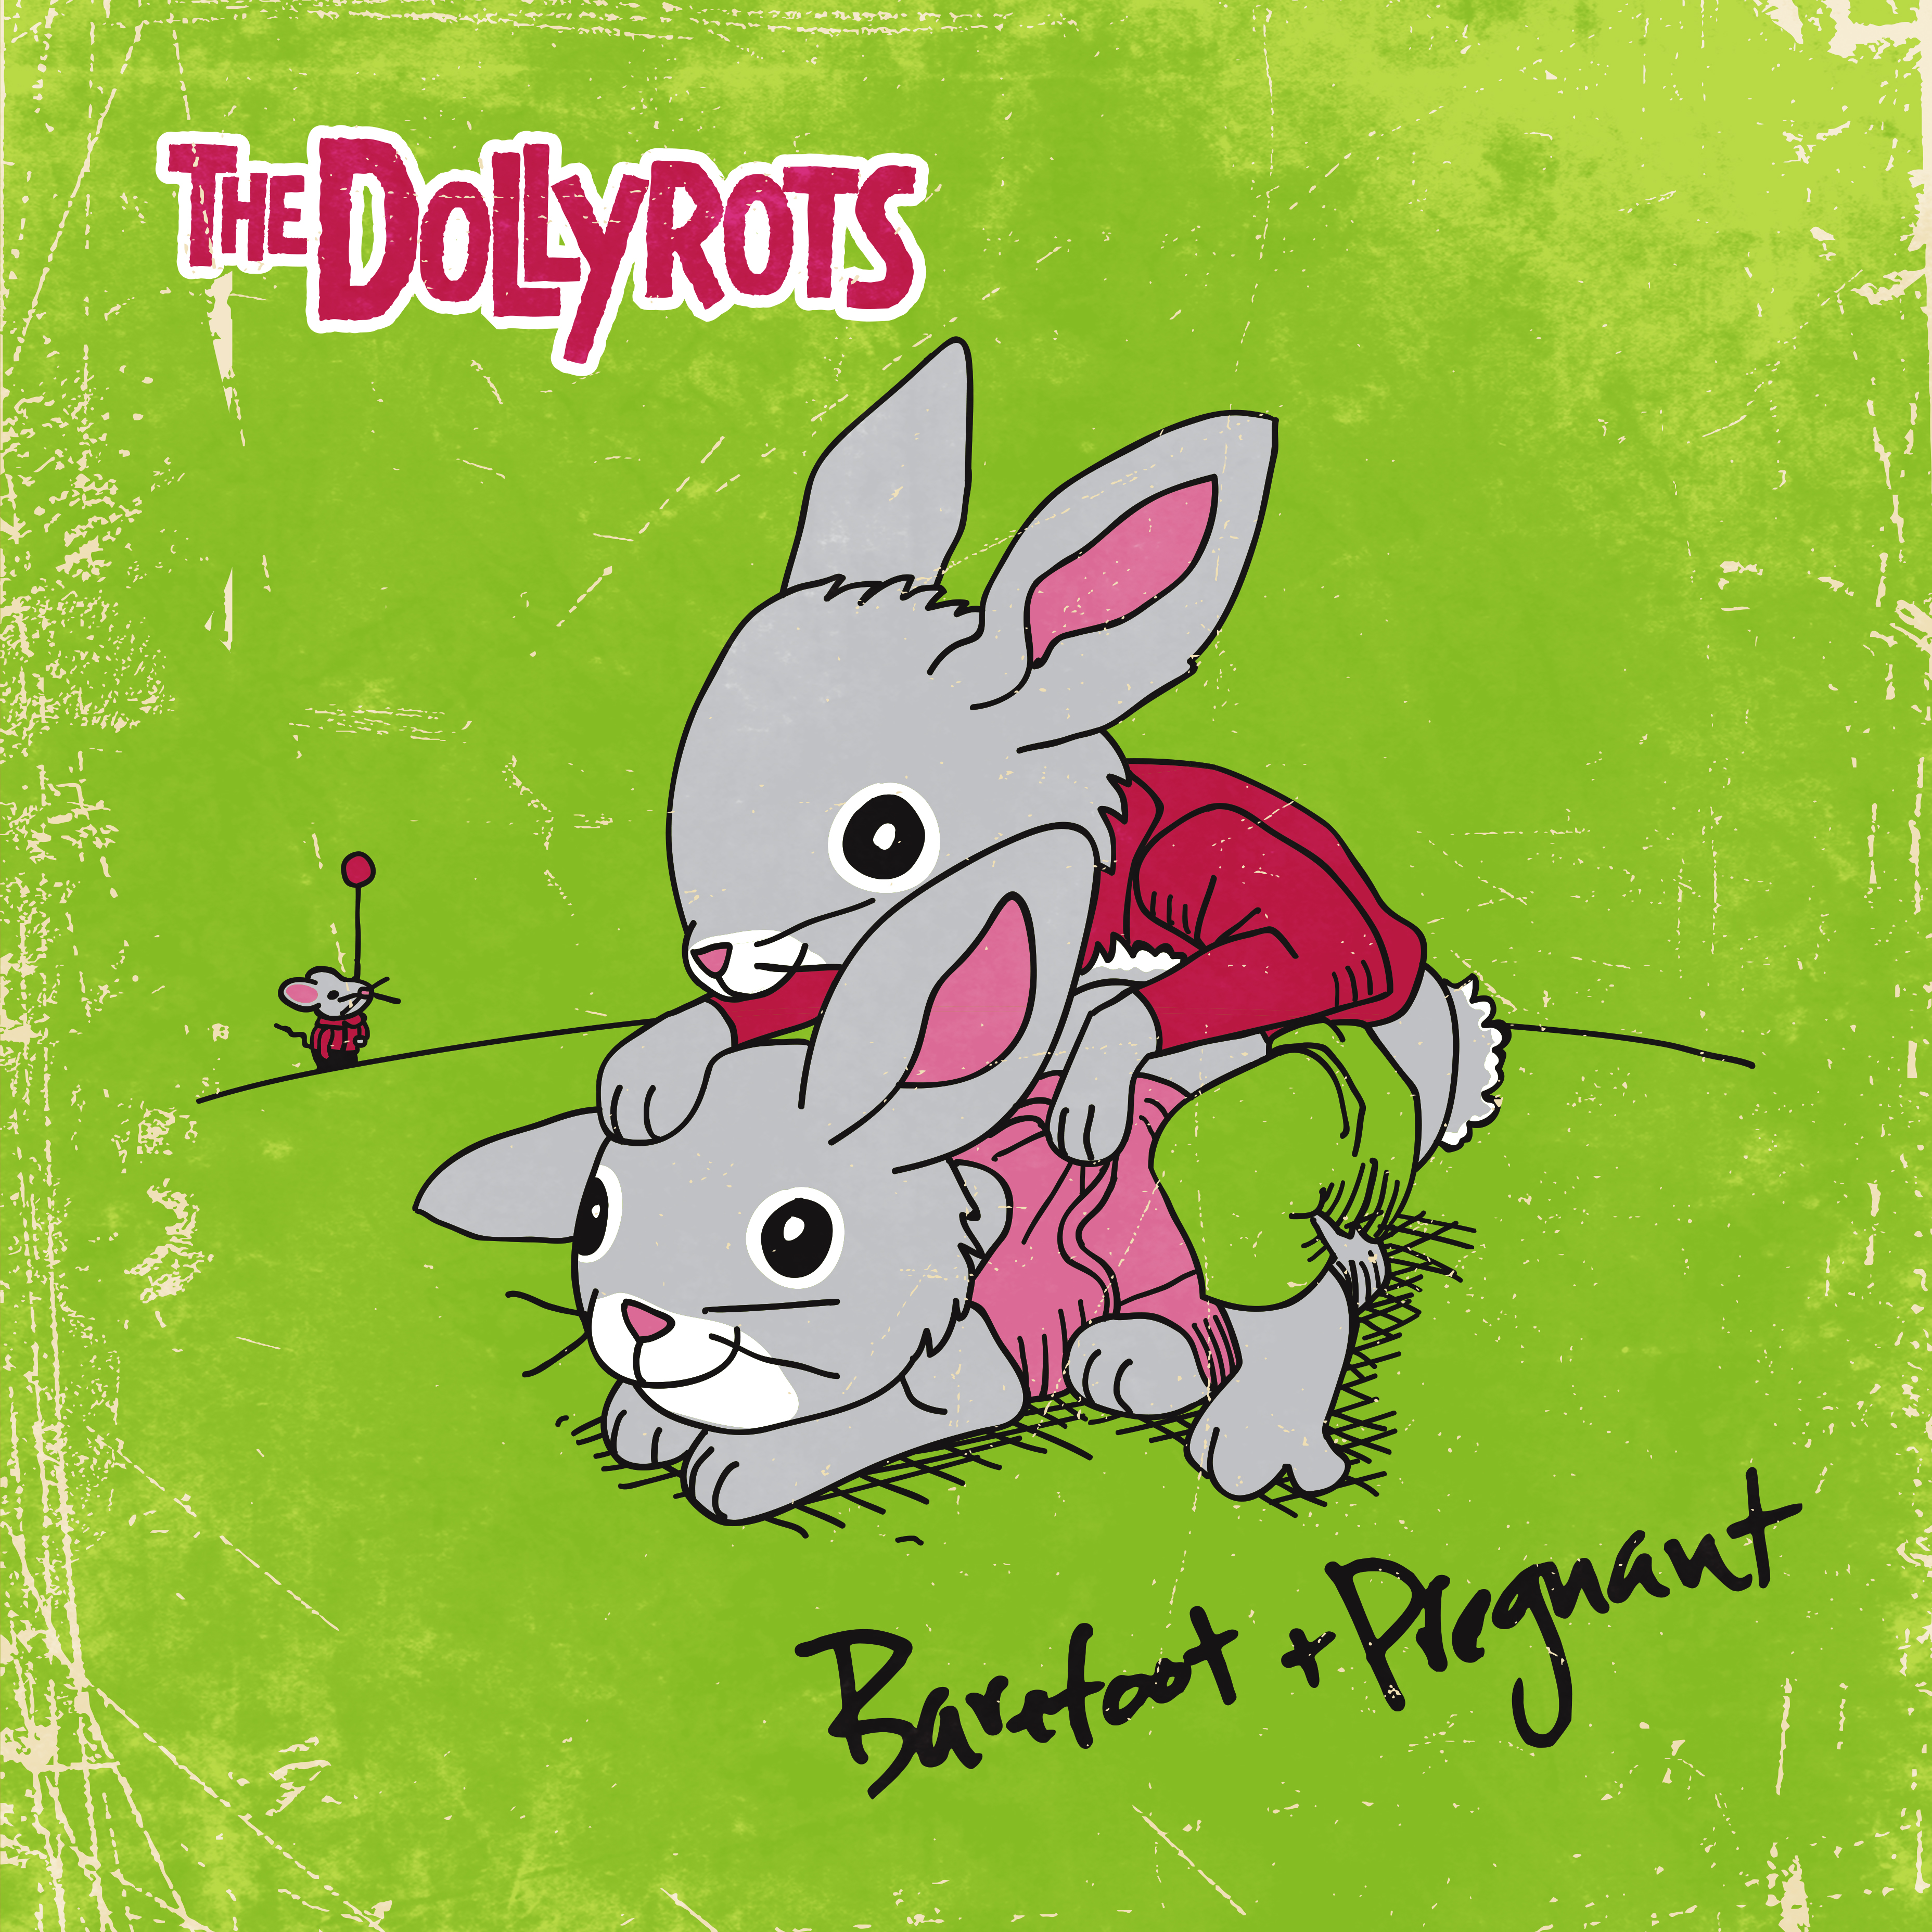 Tastes Like Rock - The Dollyrots - Barefoot and Pregnant Review